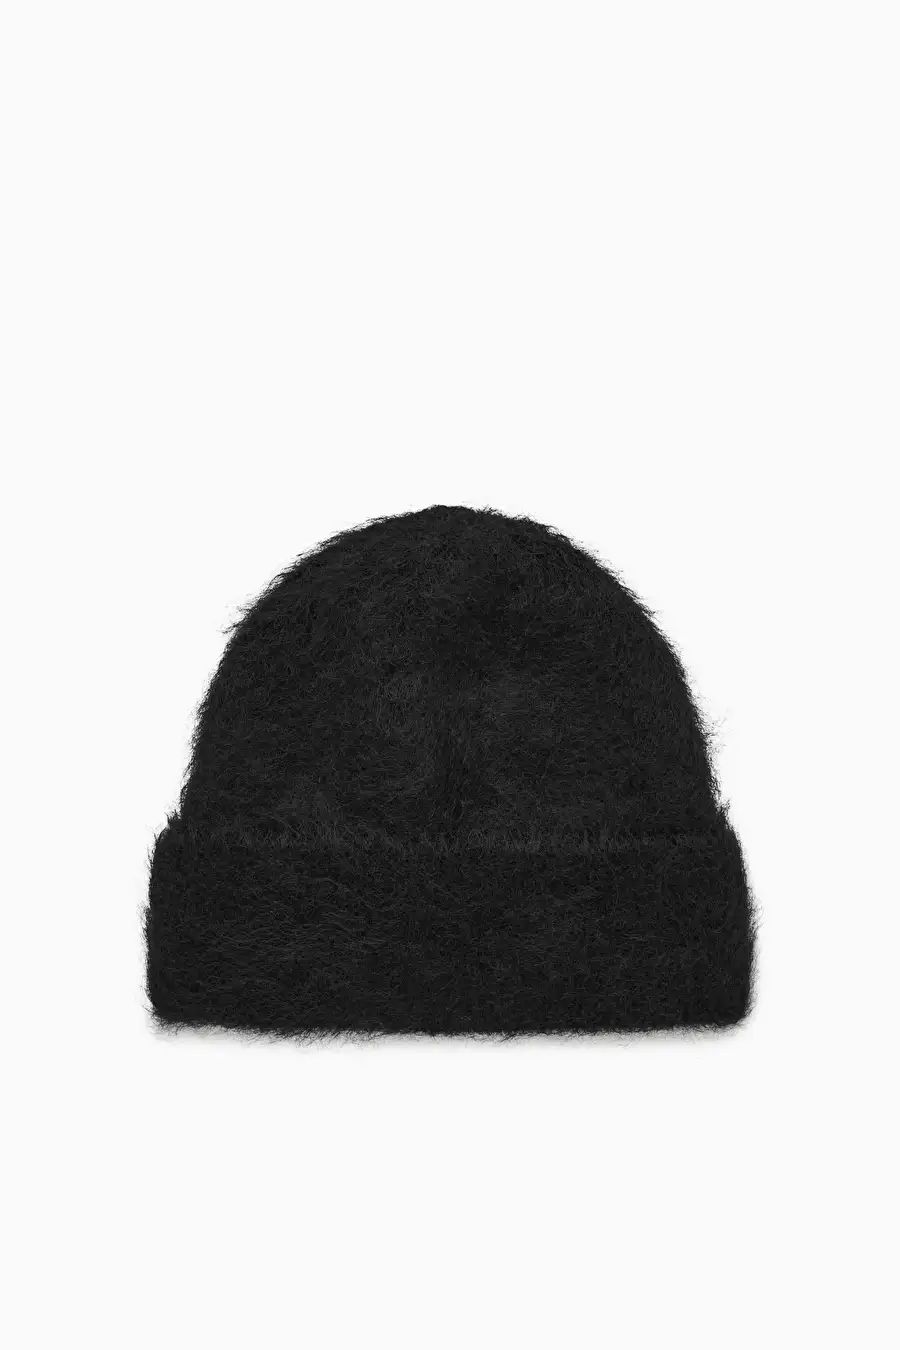 TEXTURED KNITTED BEANIE HAT - BLACK - COS | COS (EU)